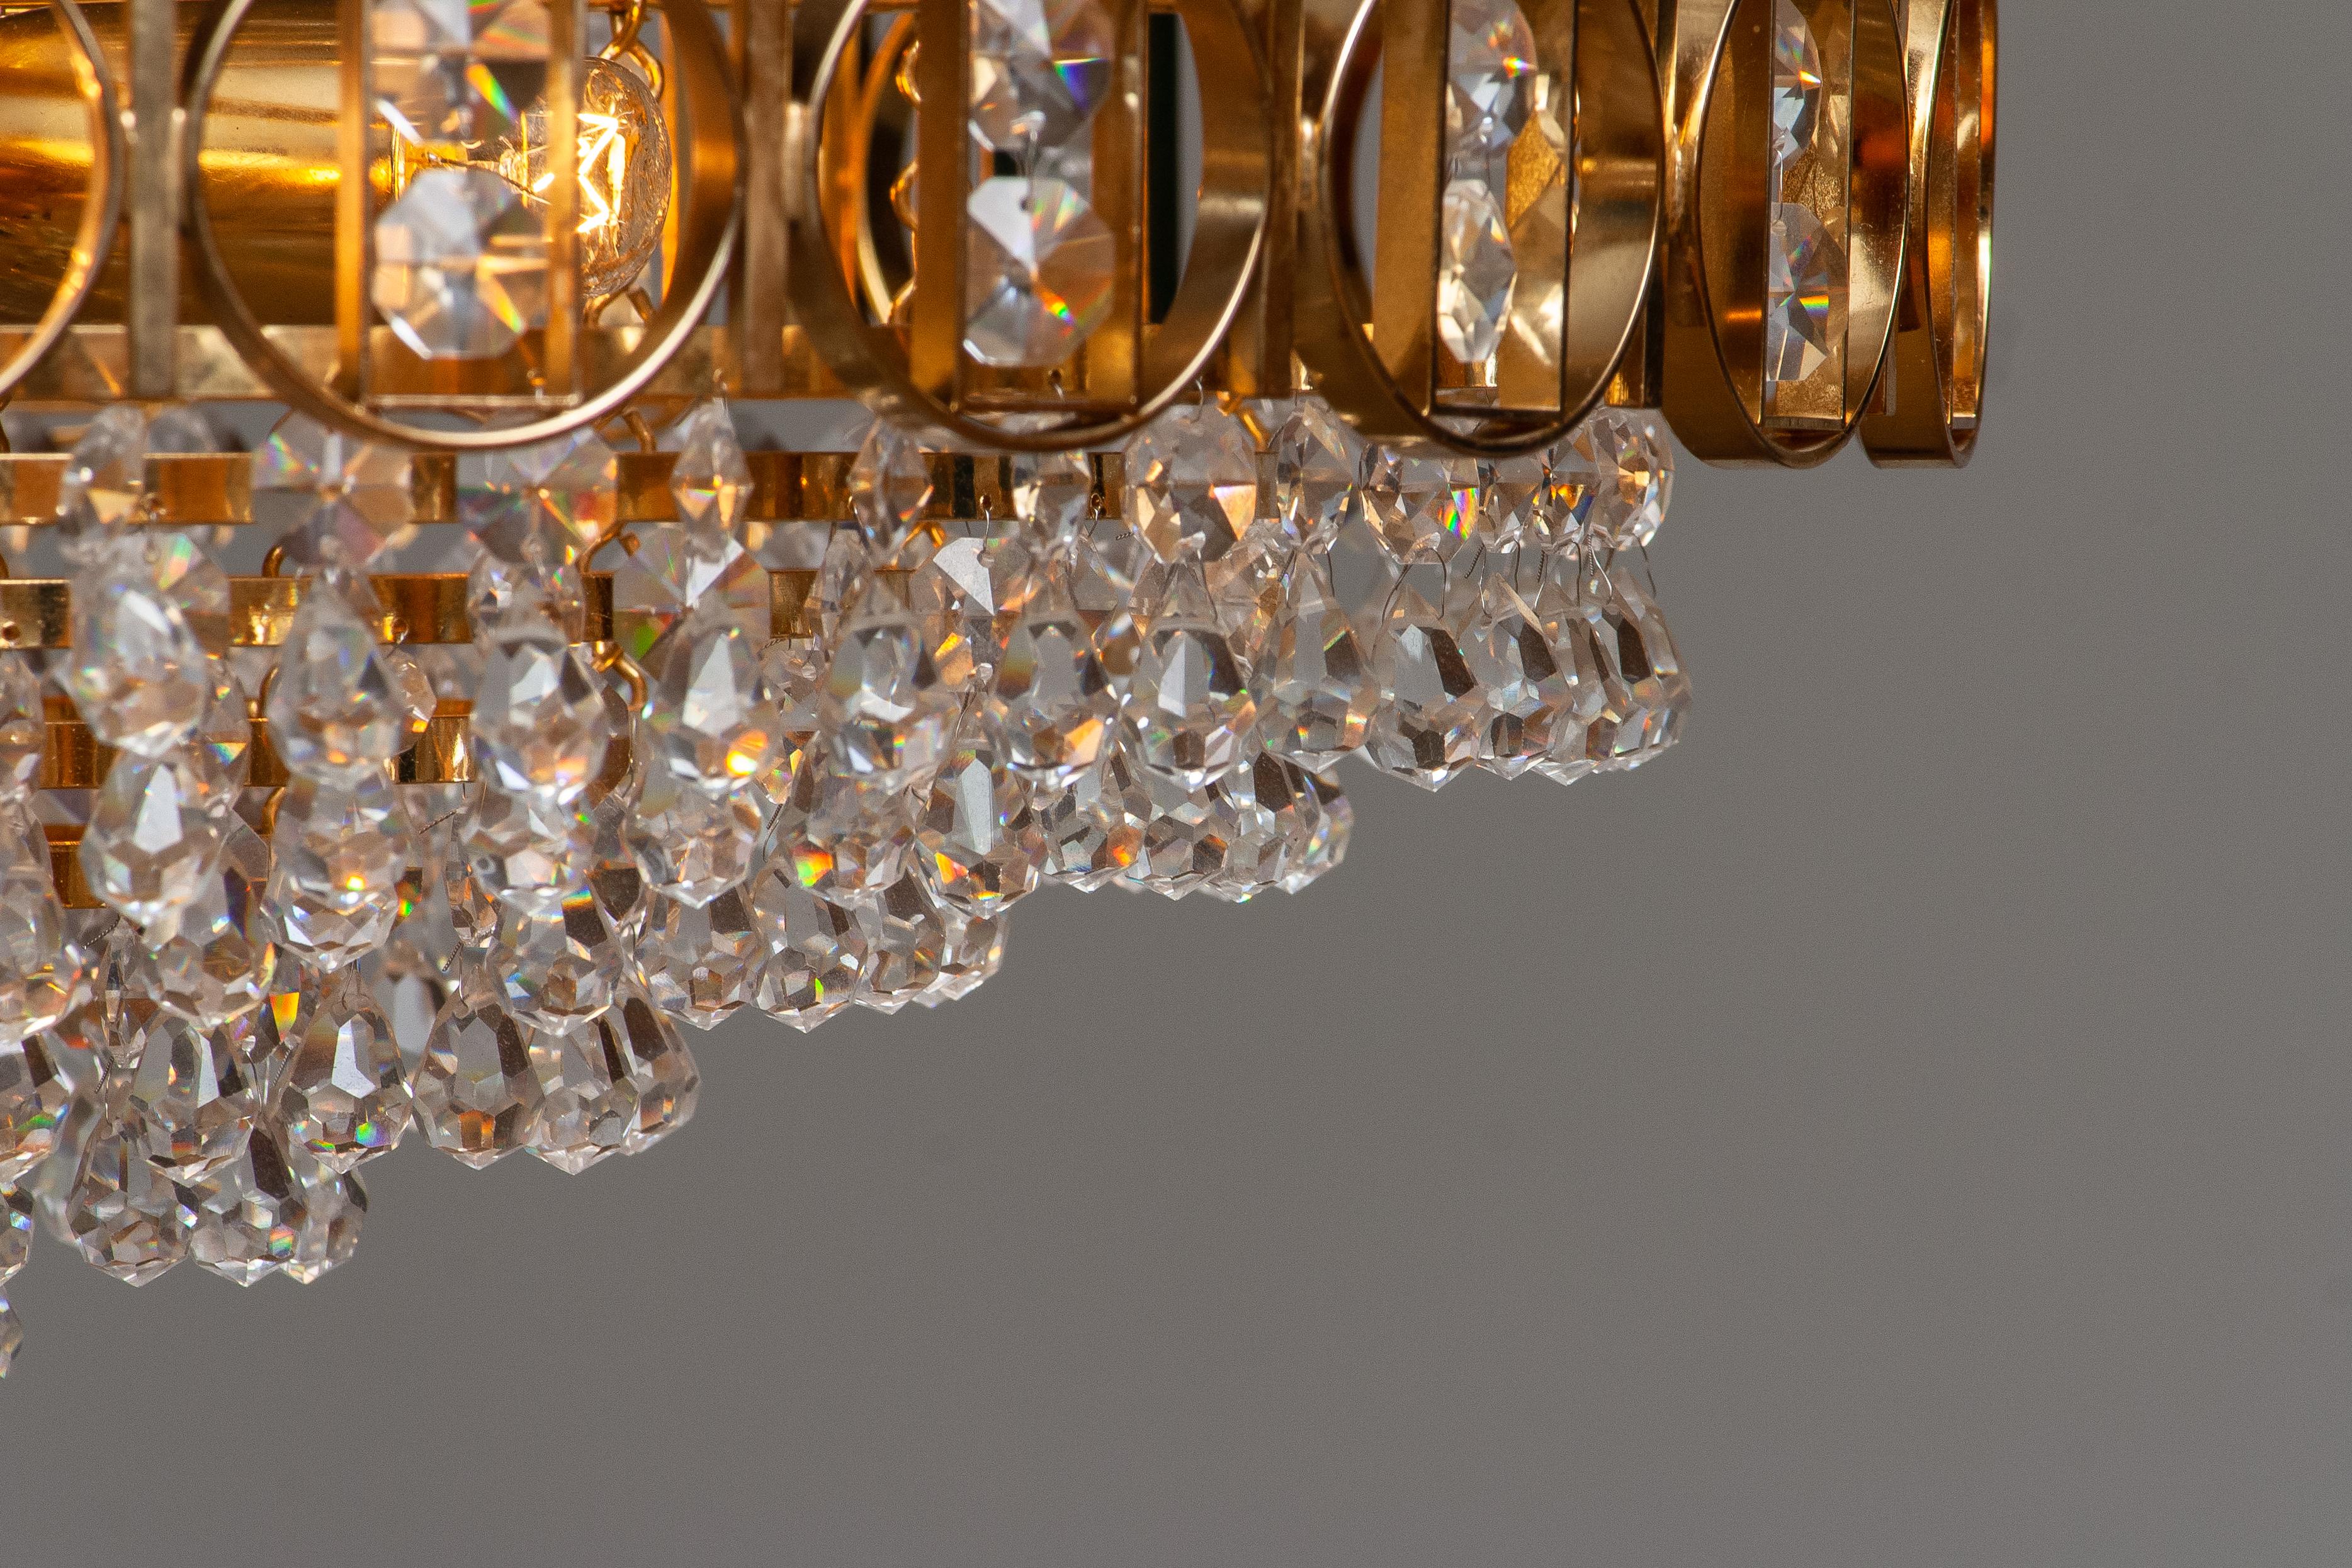 Late 20th Century 1970s, Gold-Plated Brass Chandelier with Faceted Crystals Made by Palwa, Germany